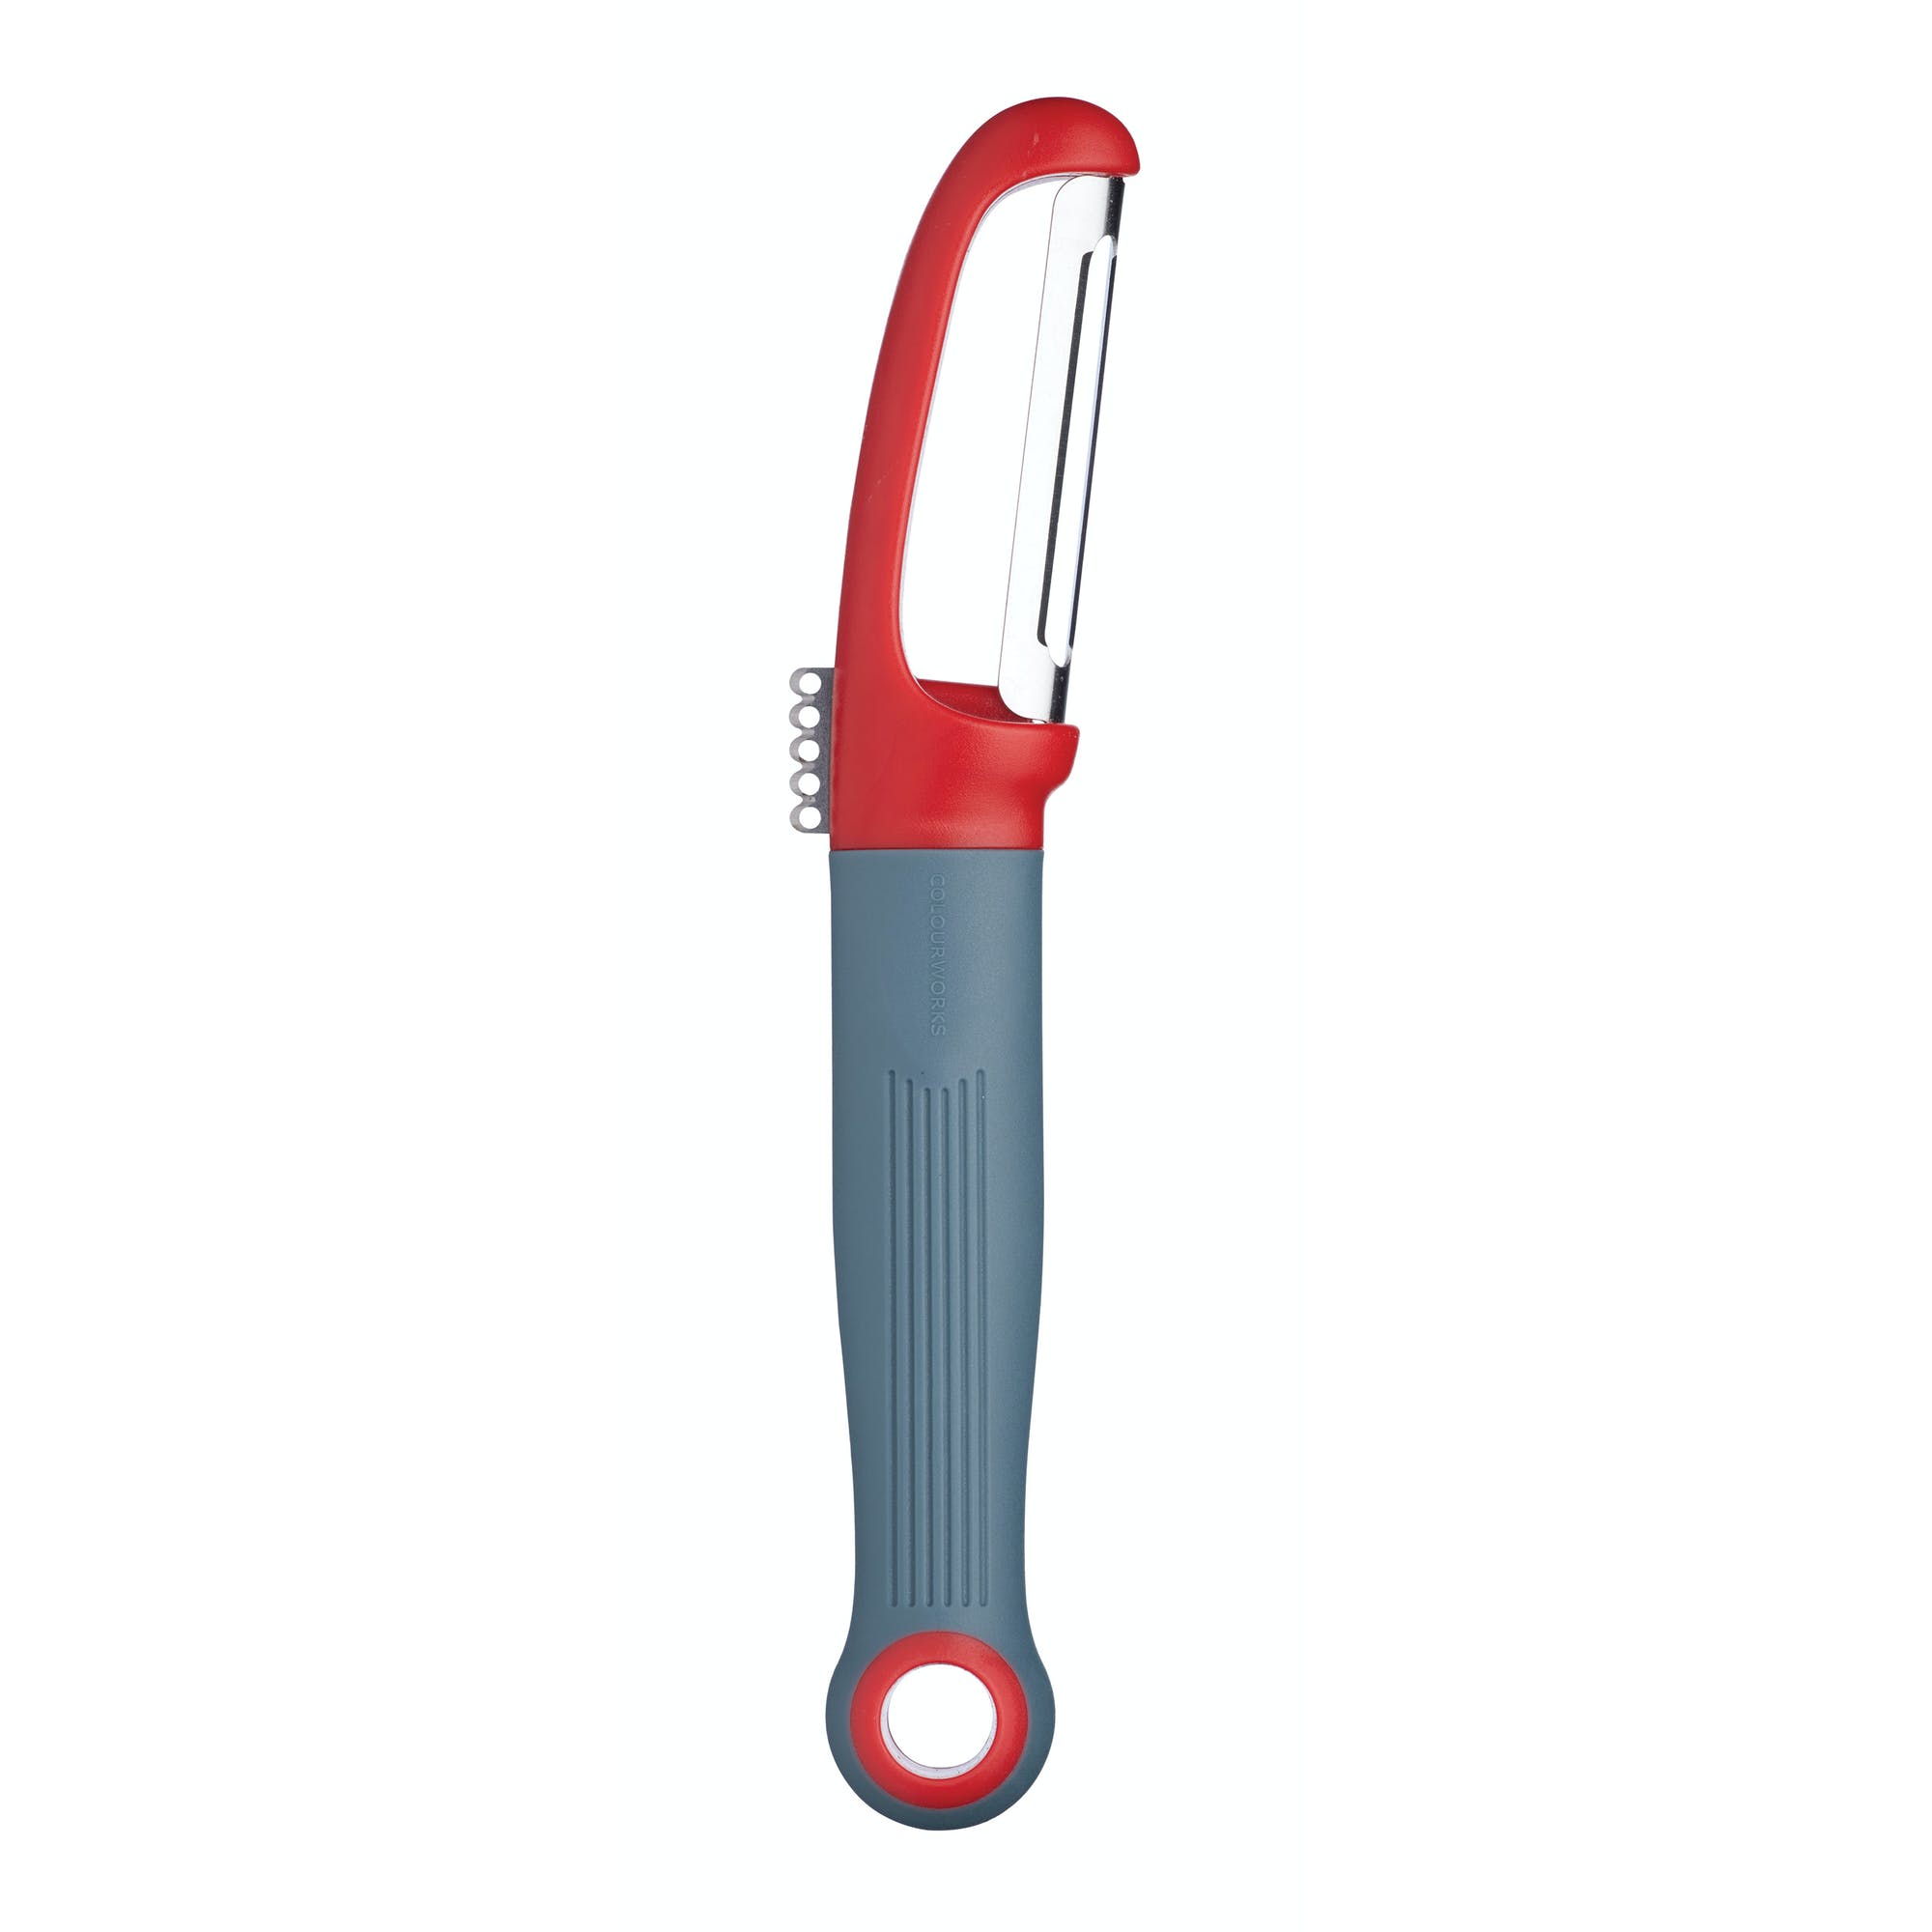 Colourworks Brights Red Straight Peeler with Zester - The Cooks Cupboard Ltd